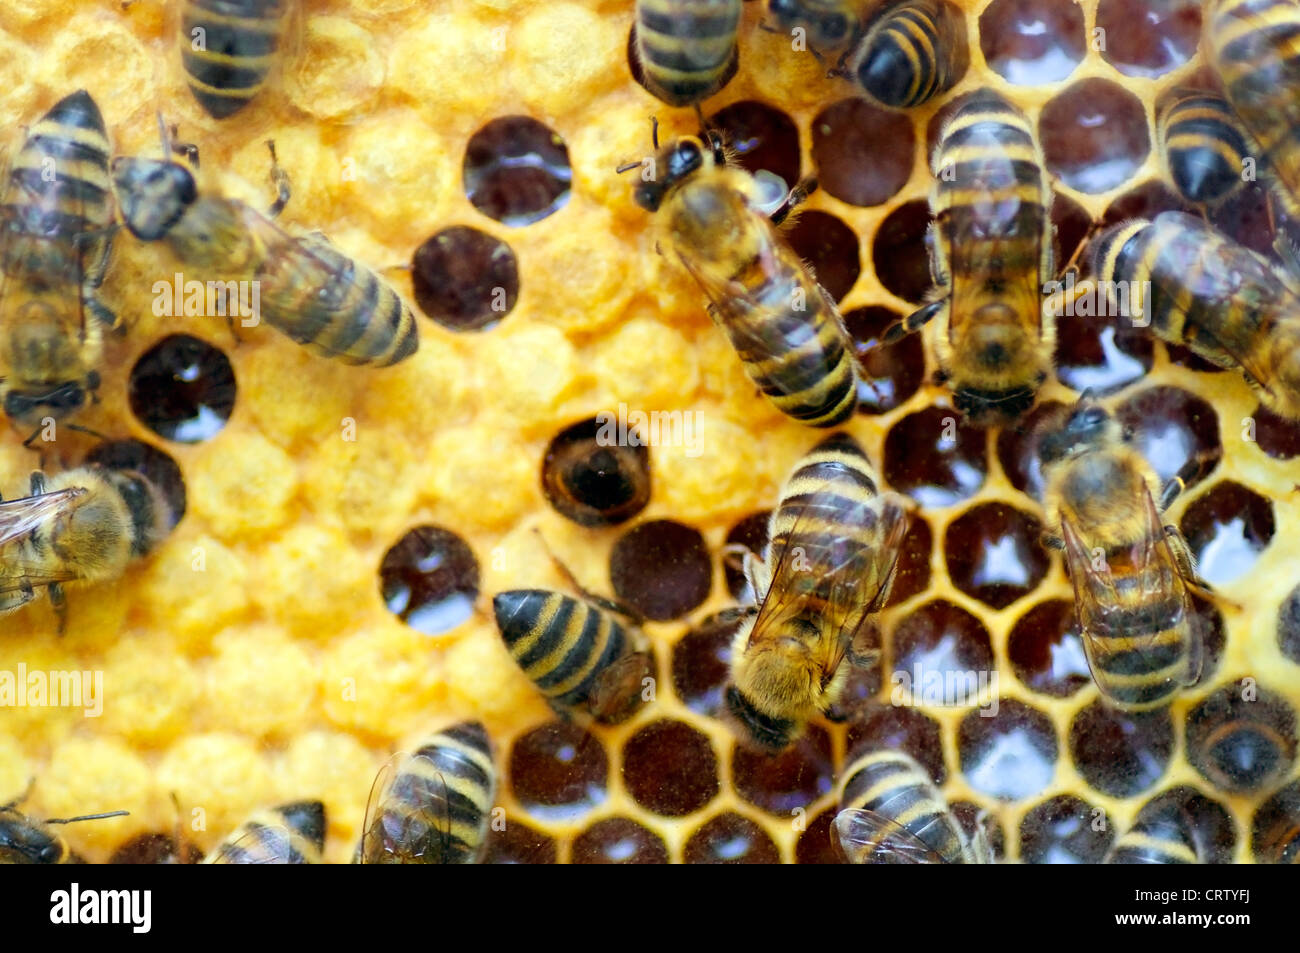 Bees filling honeycombs with honey in their Beehive Stock Photo